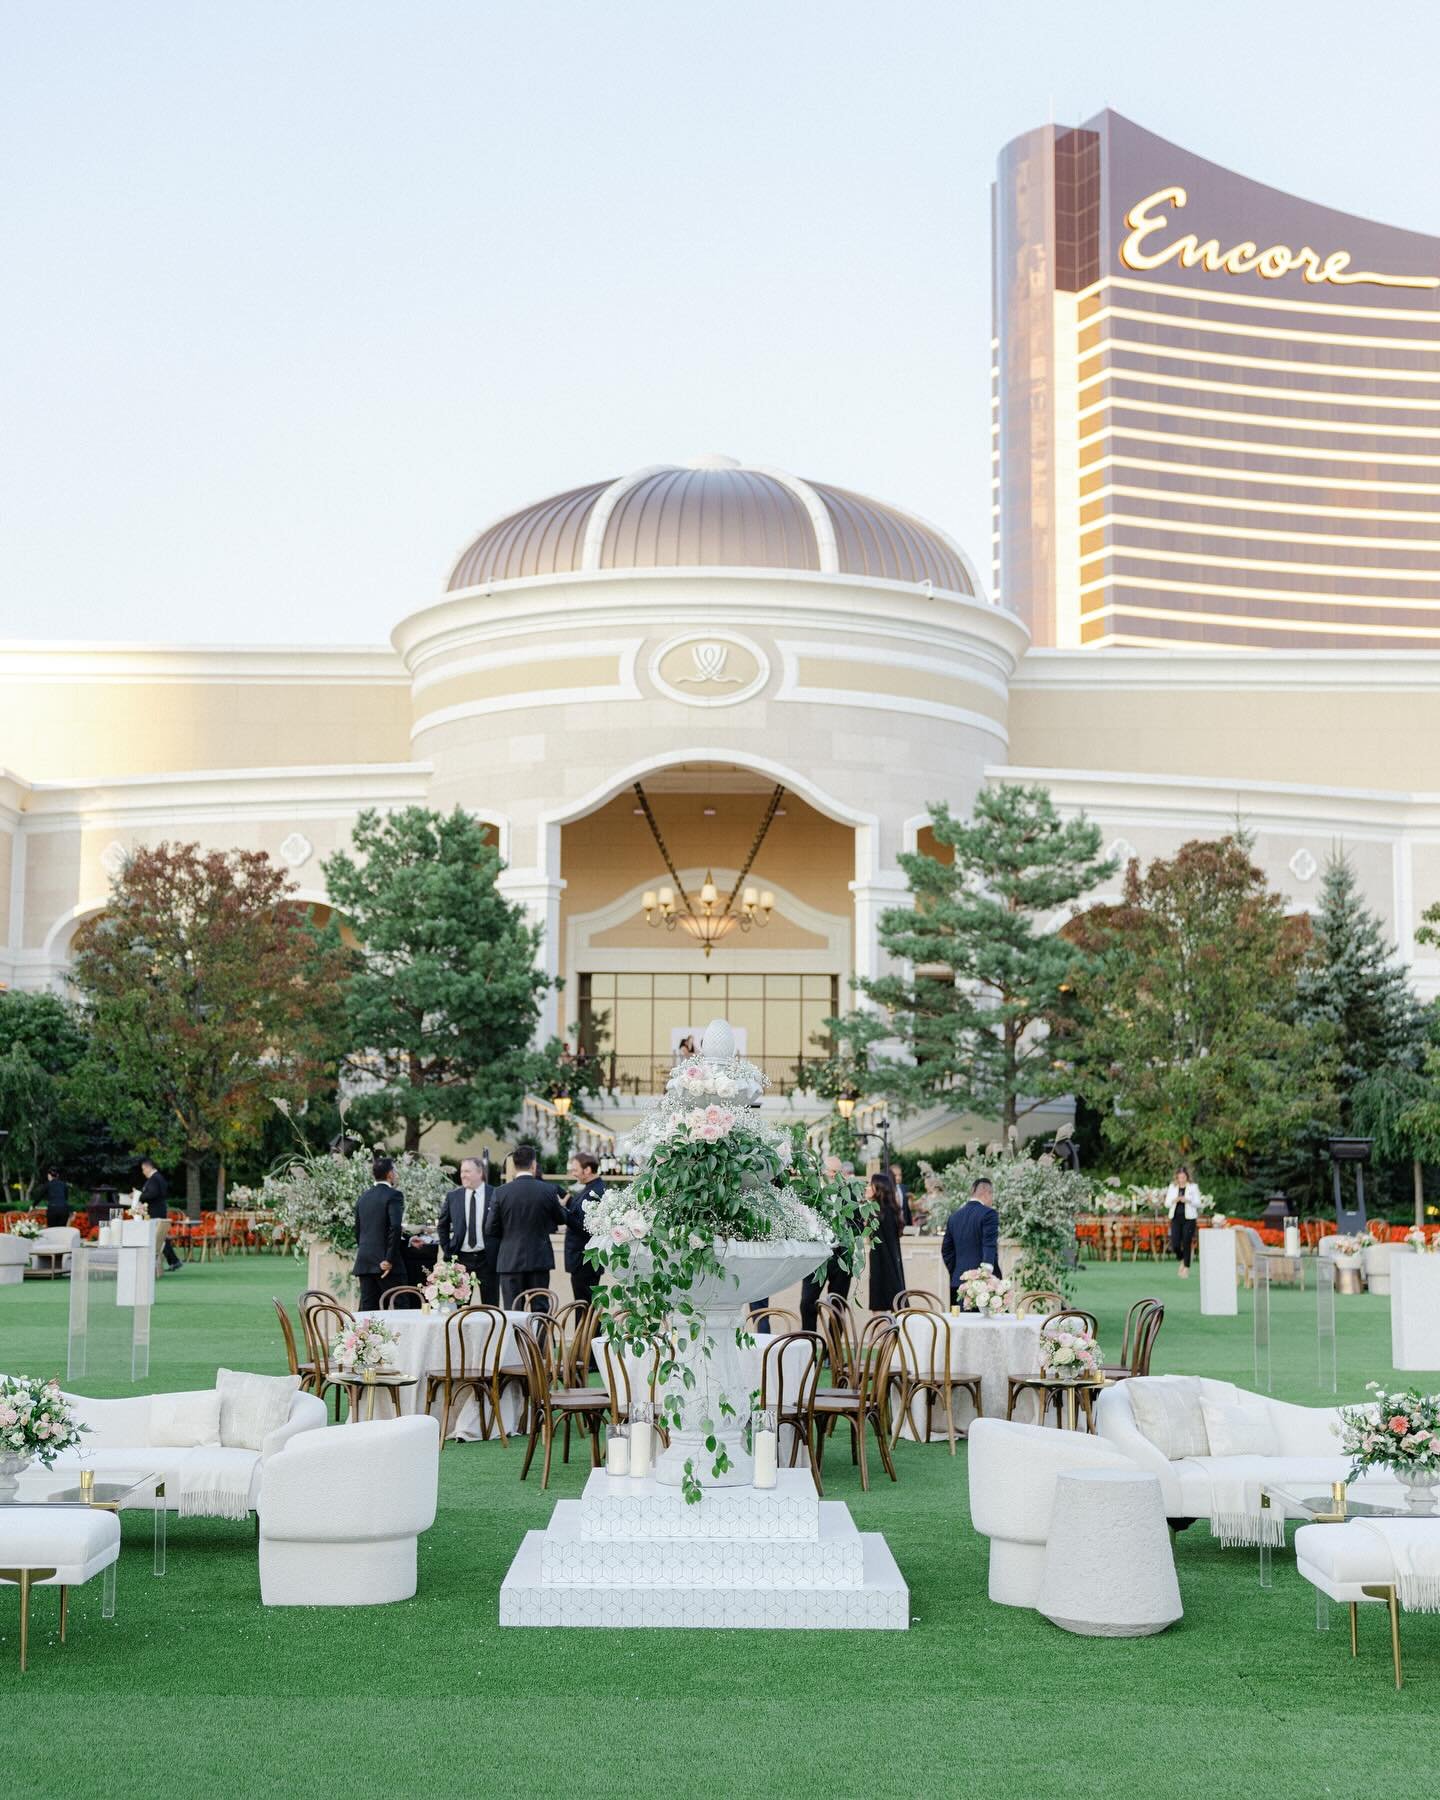 DETAILS MAKE PERFECTION.

Embracing crisp regality, this celebration is a testament to the power of impeccable details. With a color theme inspired by nature&rsquo;s palette and adorned in white, the outdoor charm sets the stage for an exceptional ex